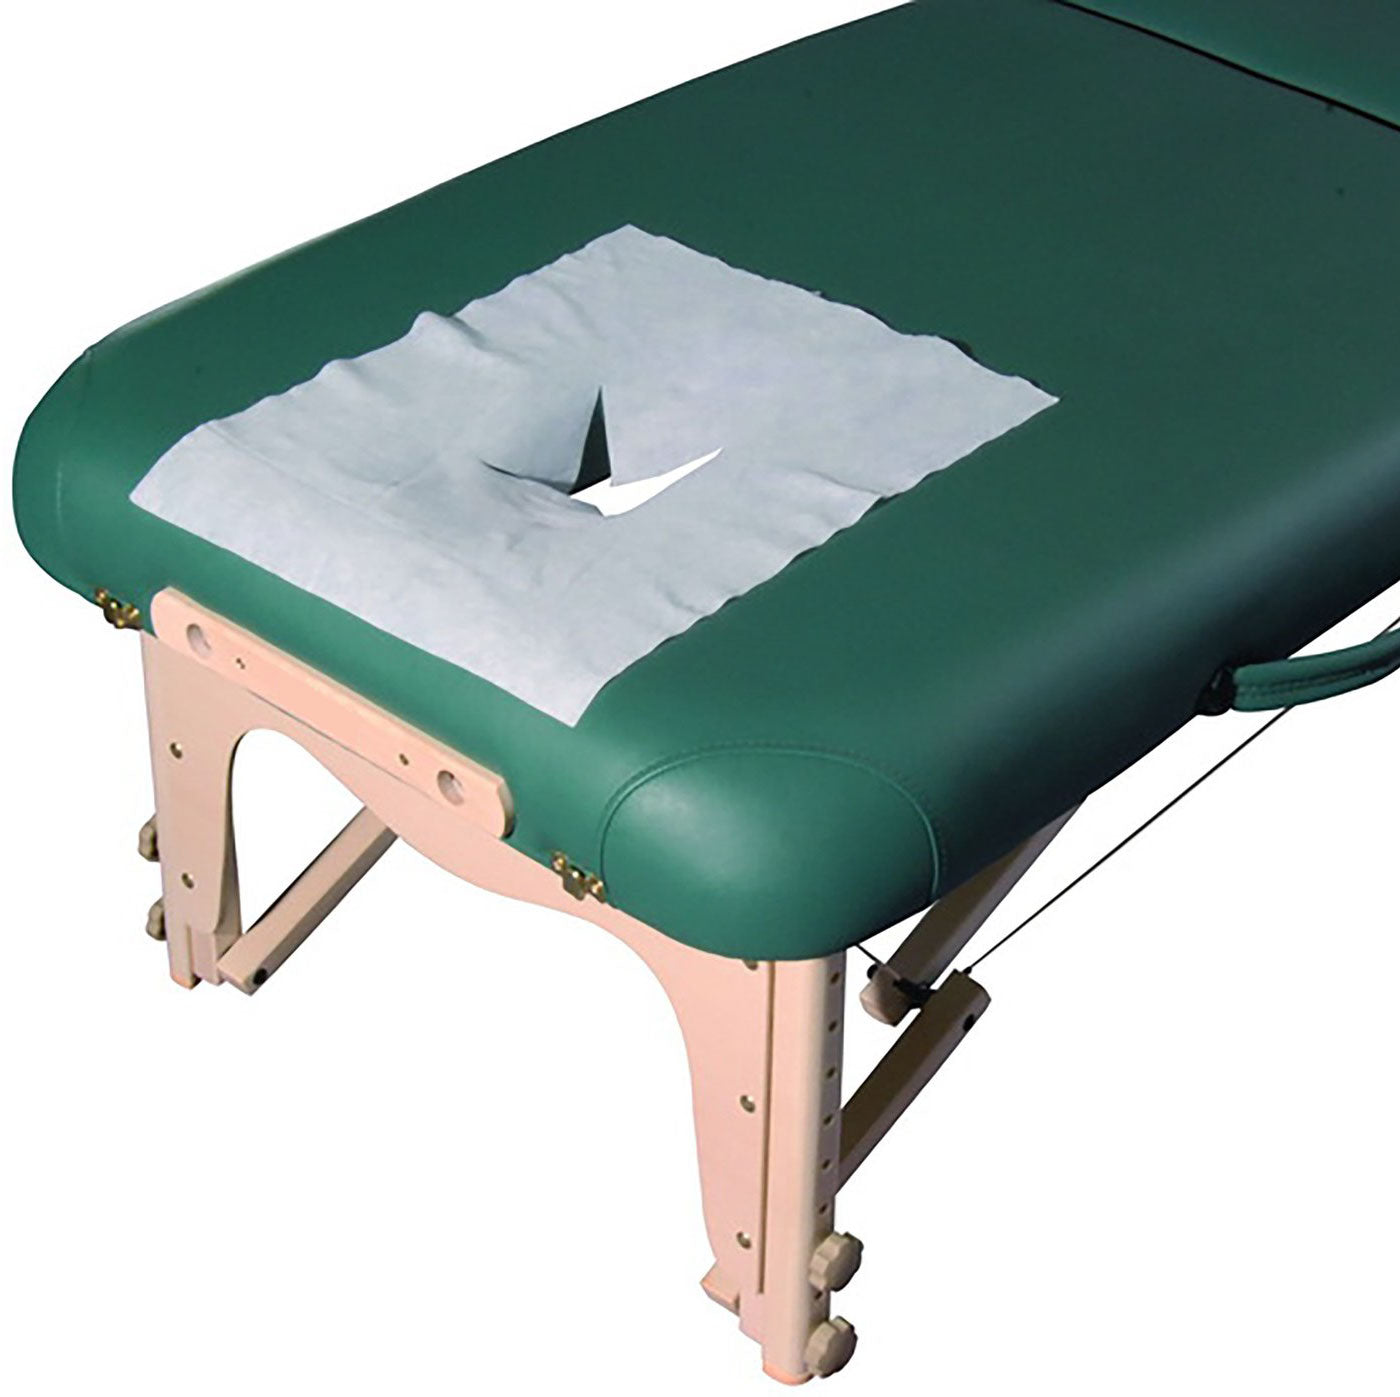 Disposable Breathing Space Cover for Massage Table